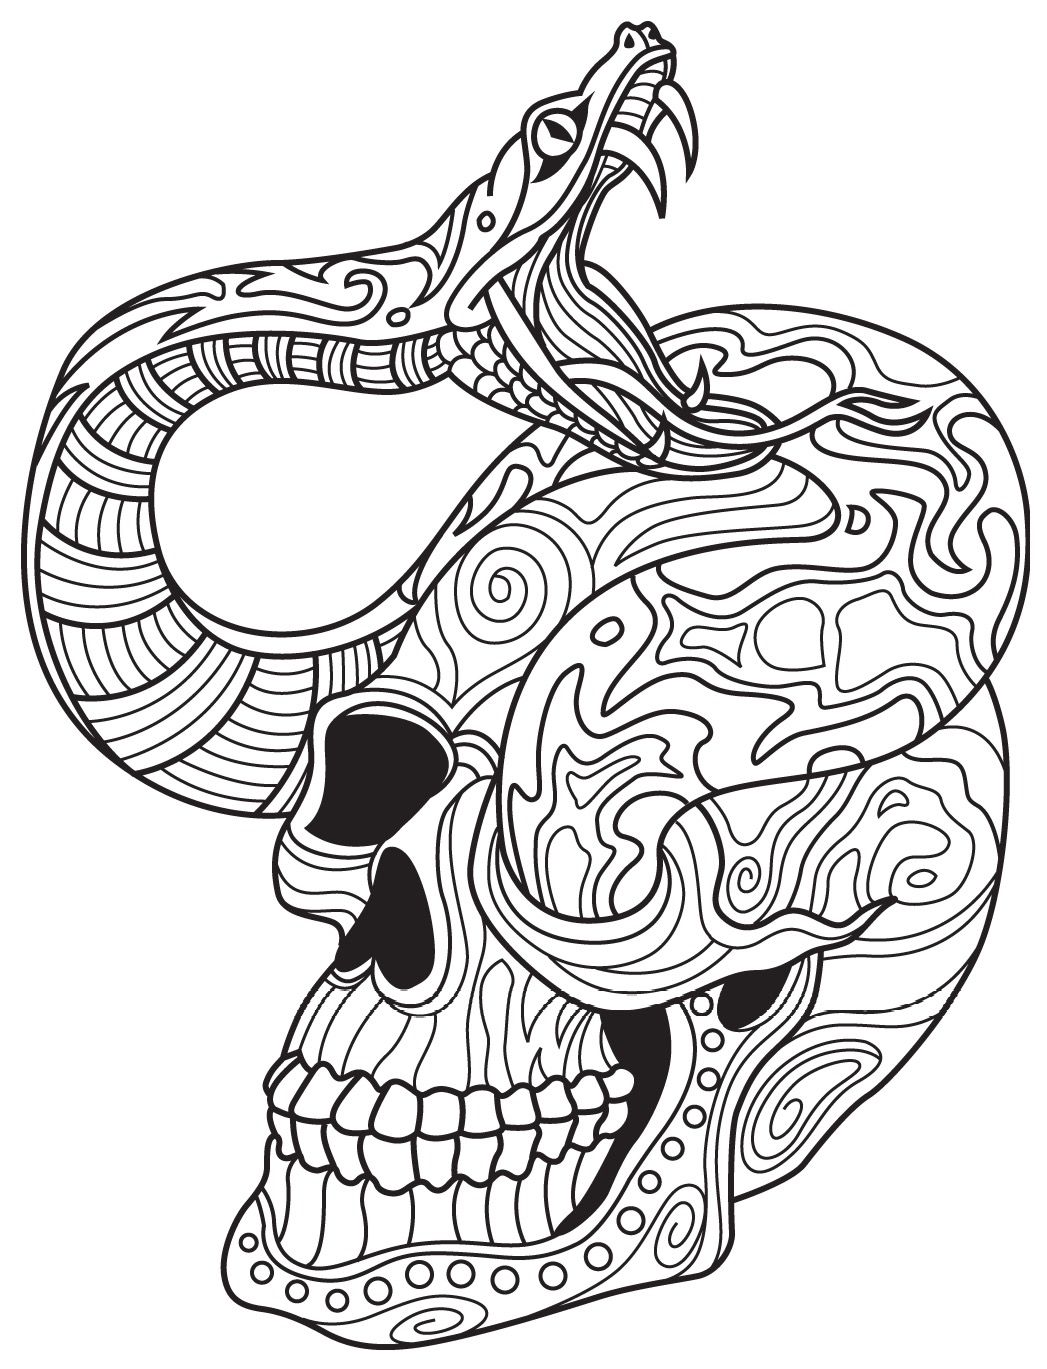 Snake and Skull | Colorish: coloring book app for adults by GoodSoftTech | Snake  coloring pages, Skull coloring pages, Coloring book app